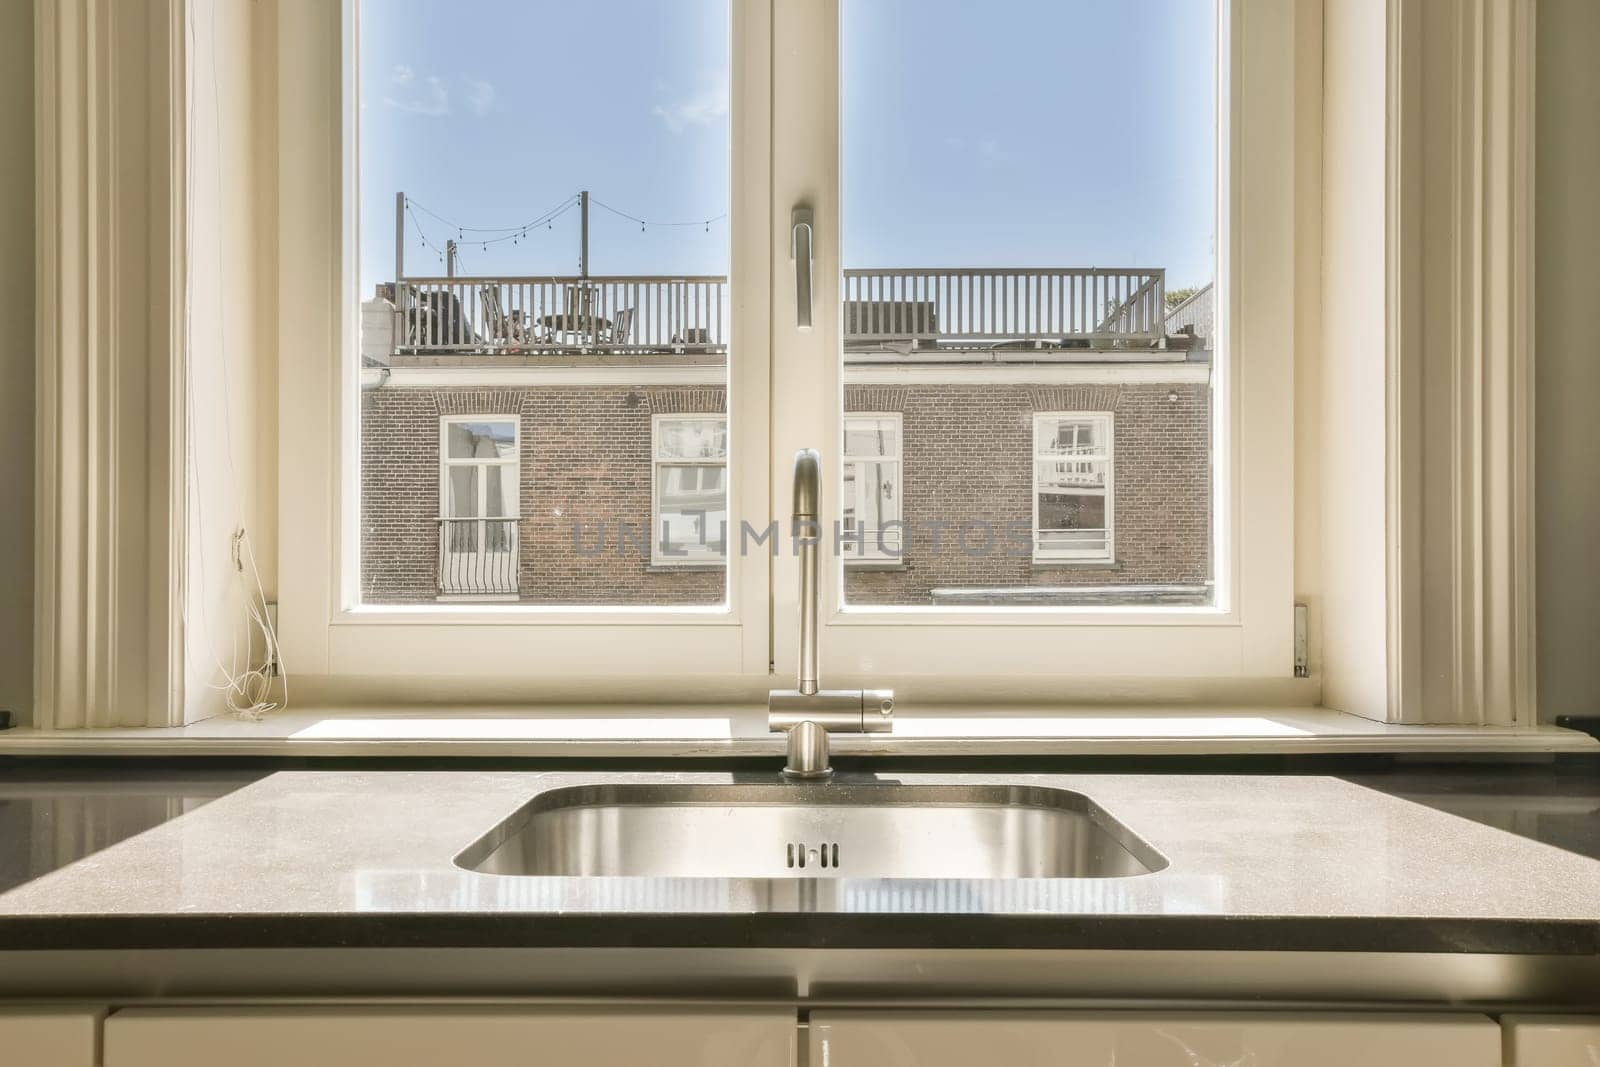 a kitchen sink in front of a window with the view of a brick building and blue sky through the windows